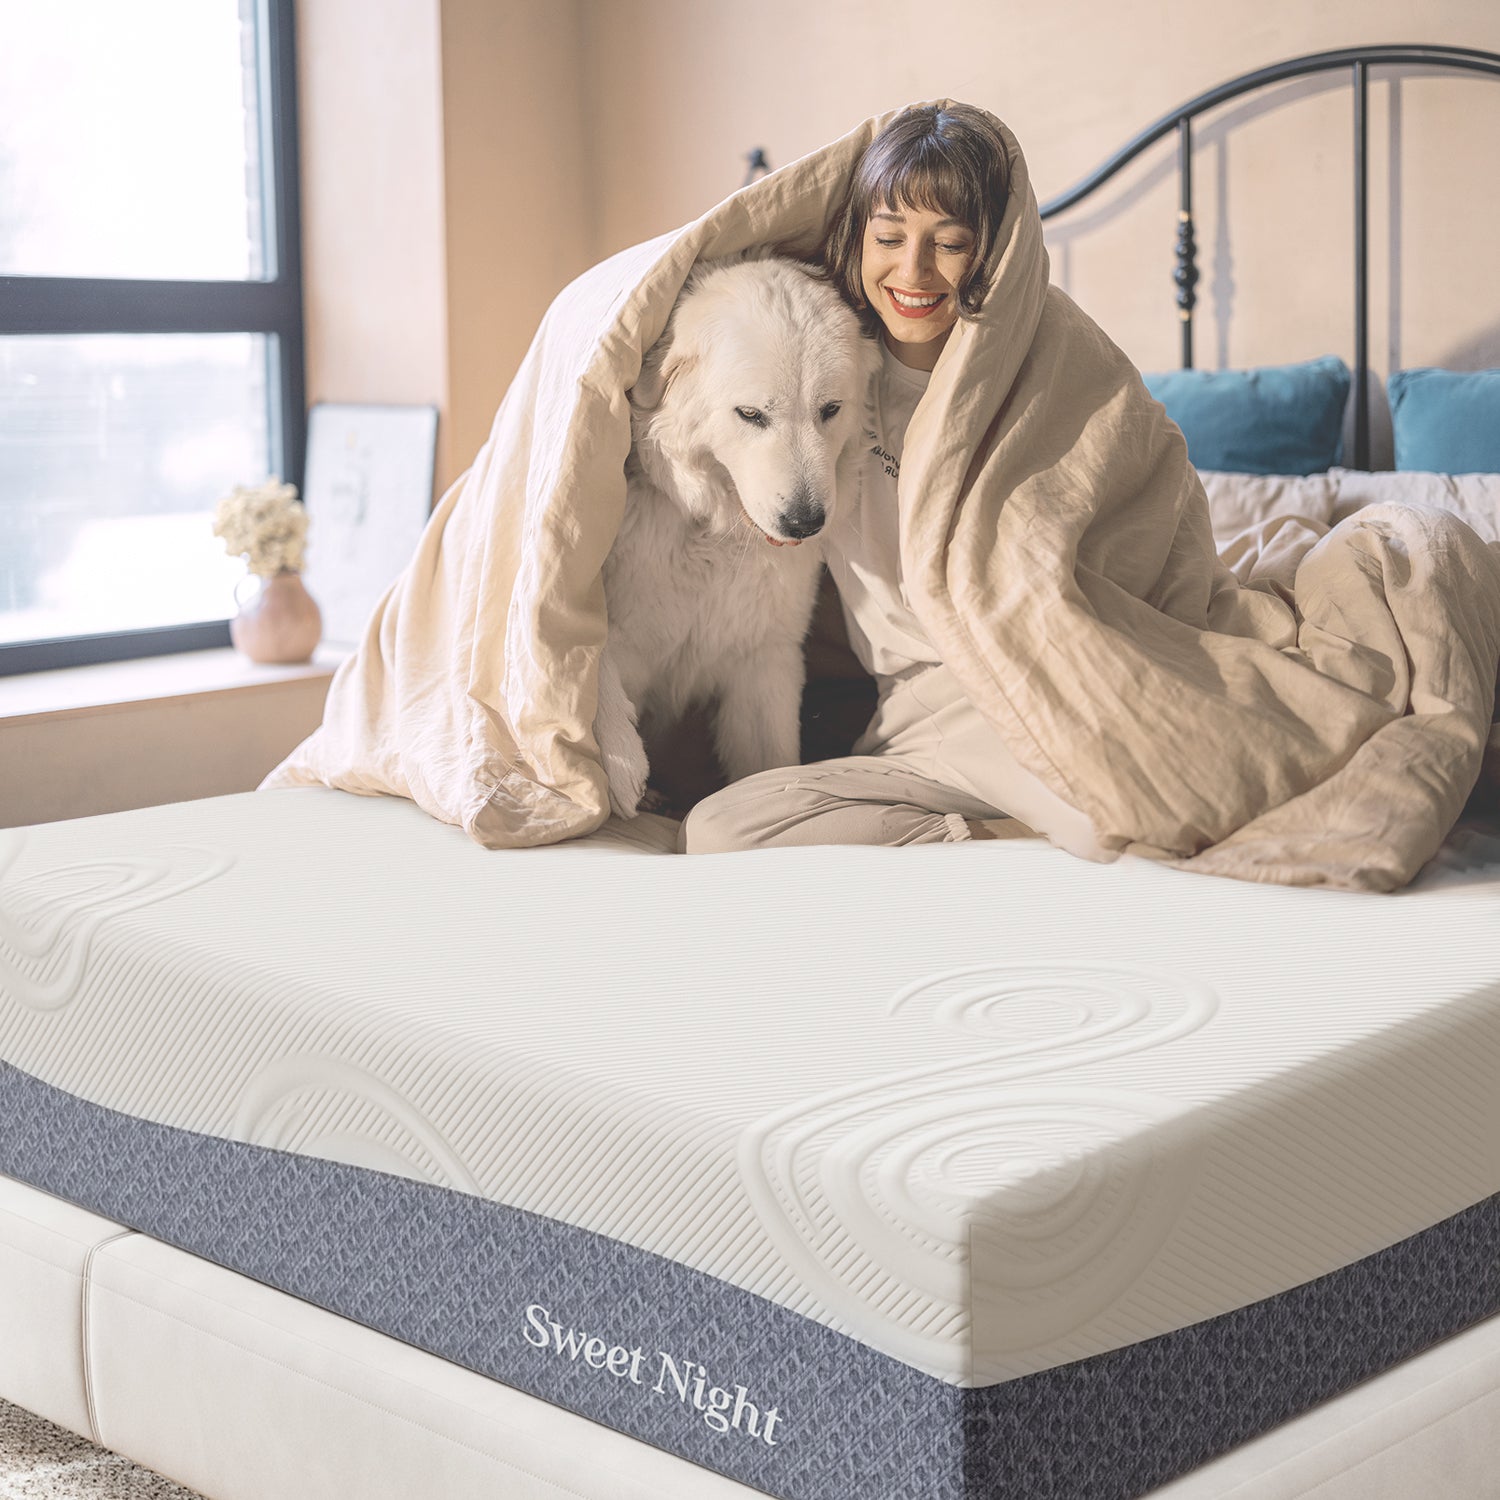 Affordable King Size Mattresses for Cozy Sleep